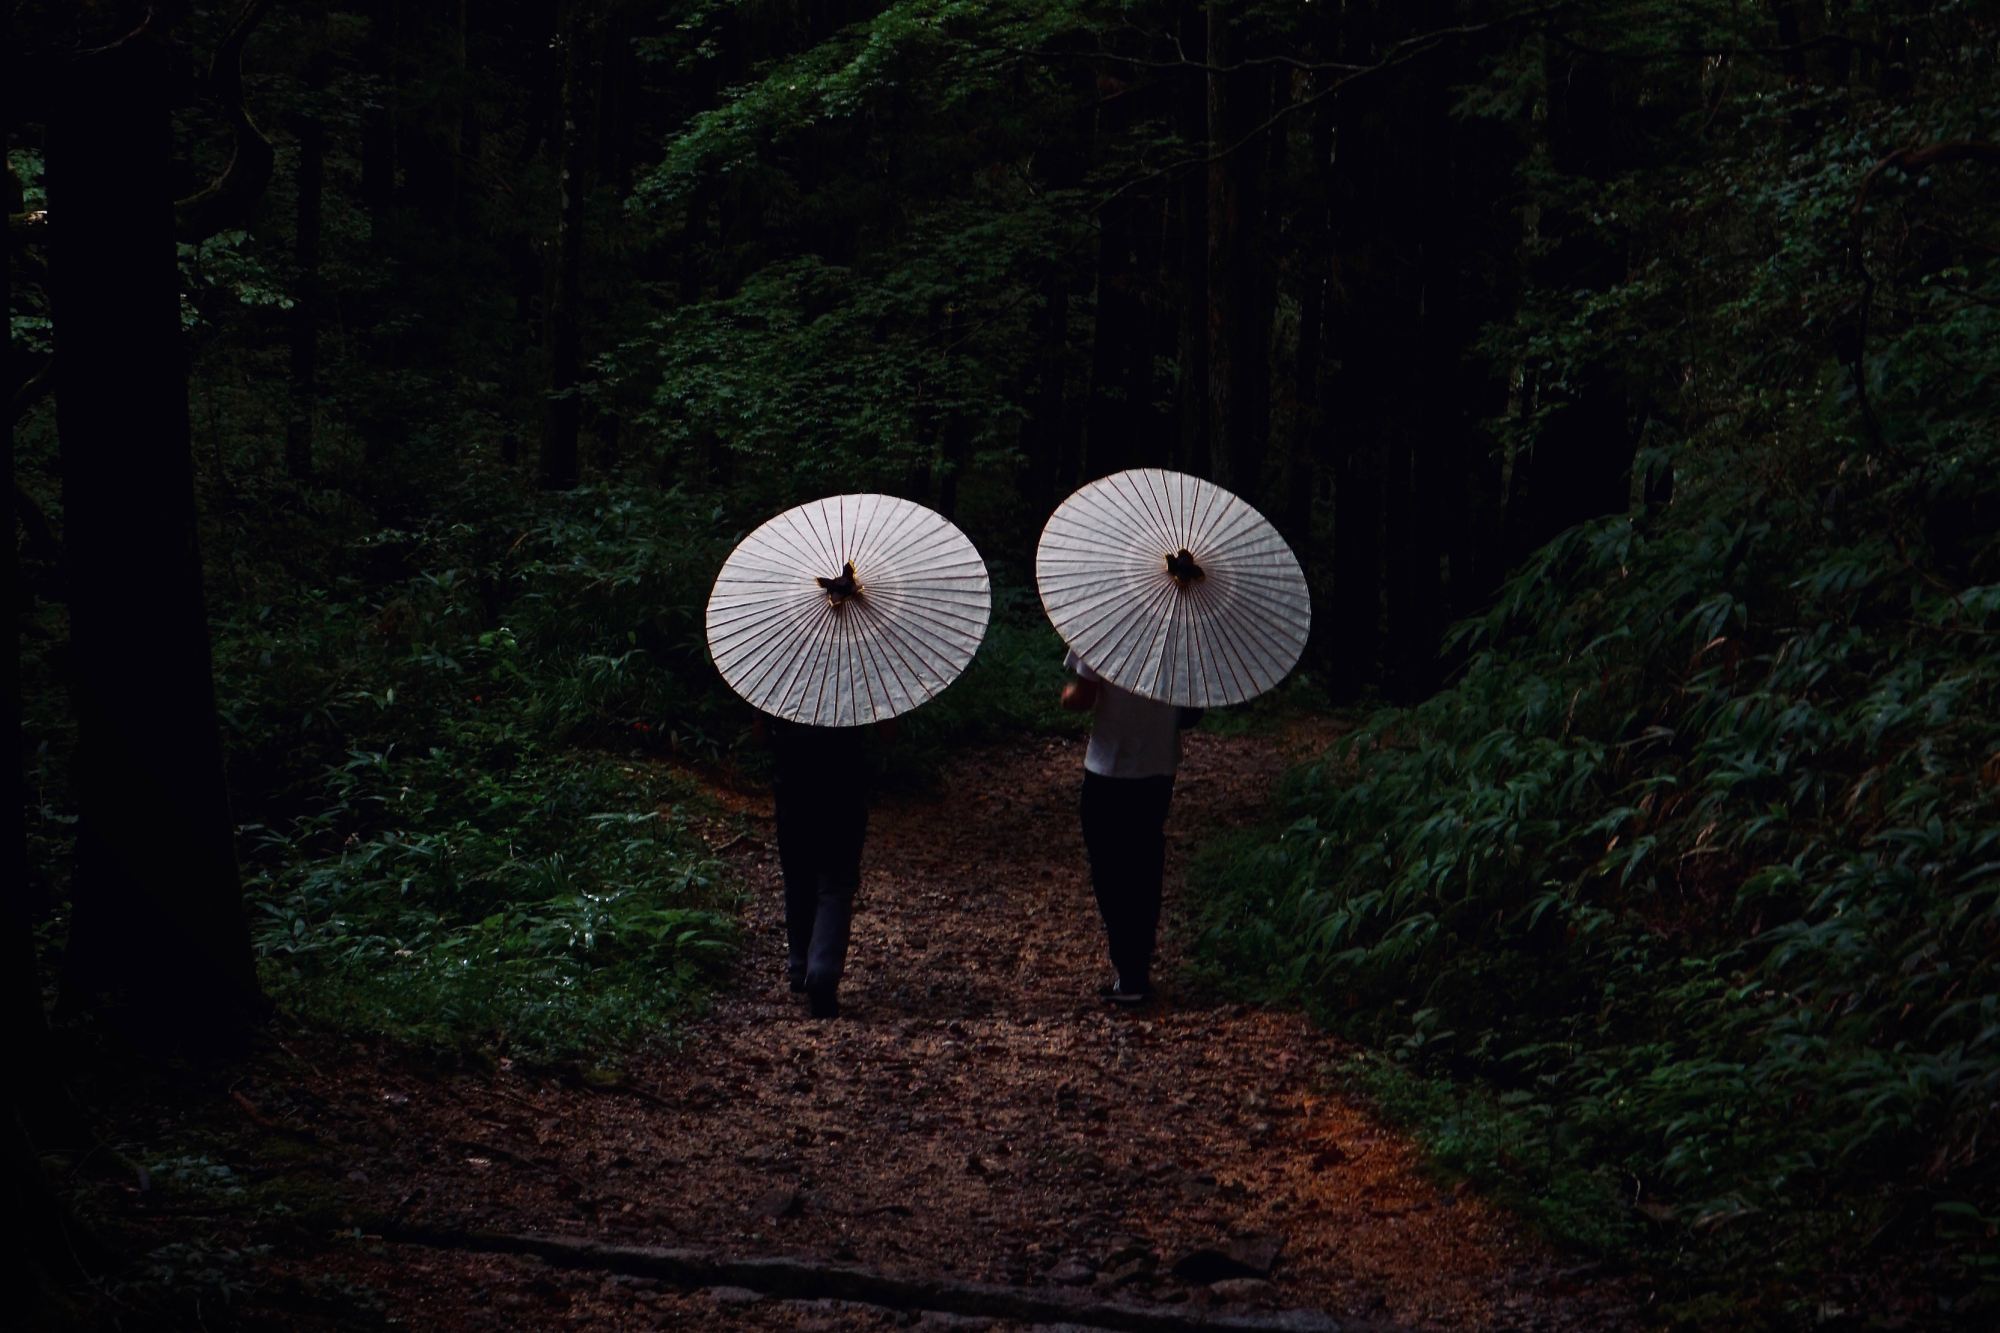 Long way round: Visitors carrying wax-paper umbrellas walk the Edo Period Nakasendo trail between the post towns of Magome and Tsumago. | OSCAR BOYD